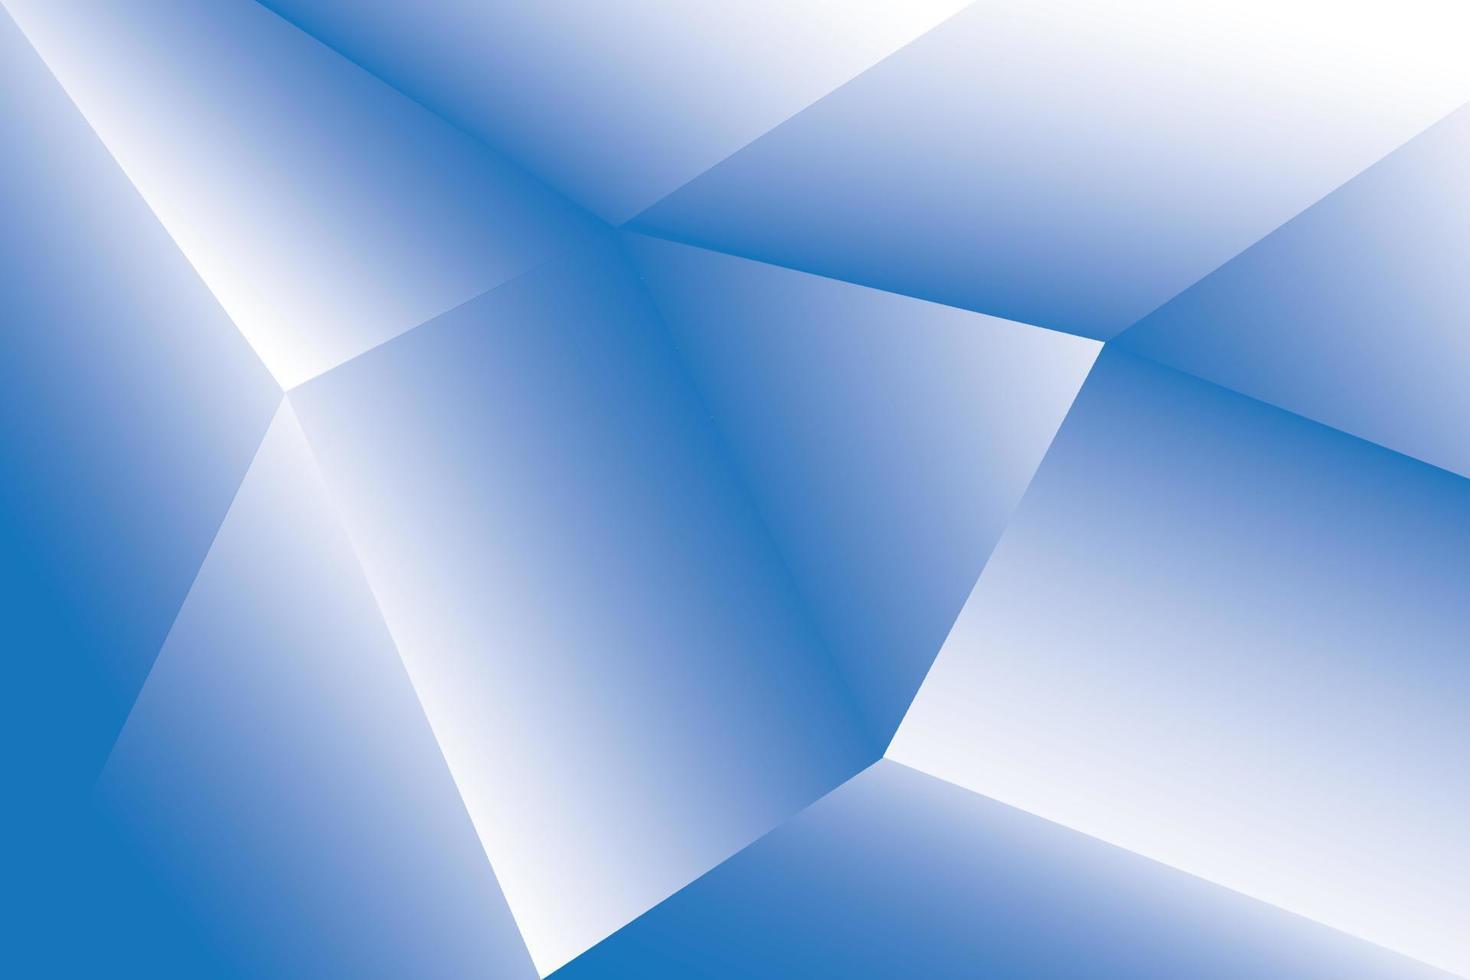 Abstract blue and white polygon background. Vector illustration.